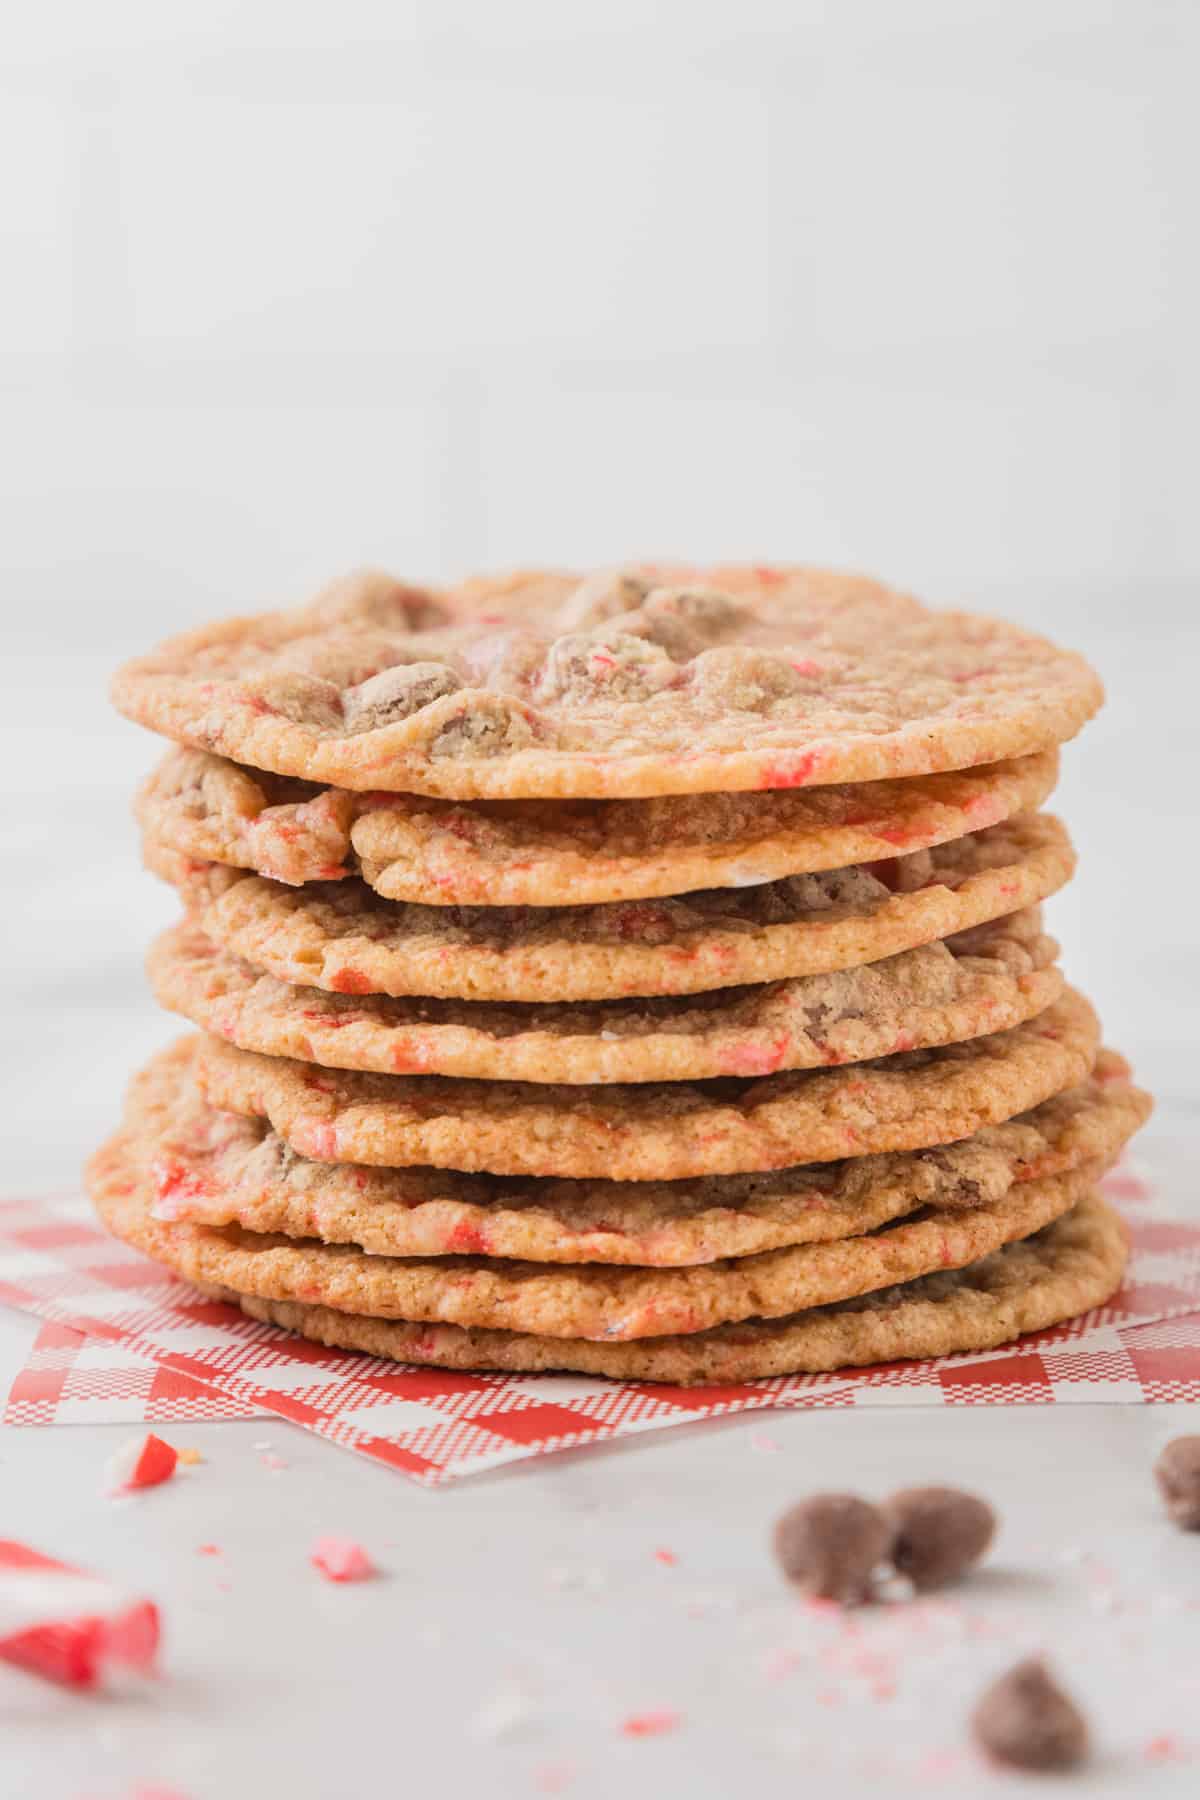 A stack of peppermint chocolate chip cookies on a table.